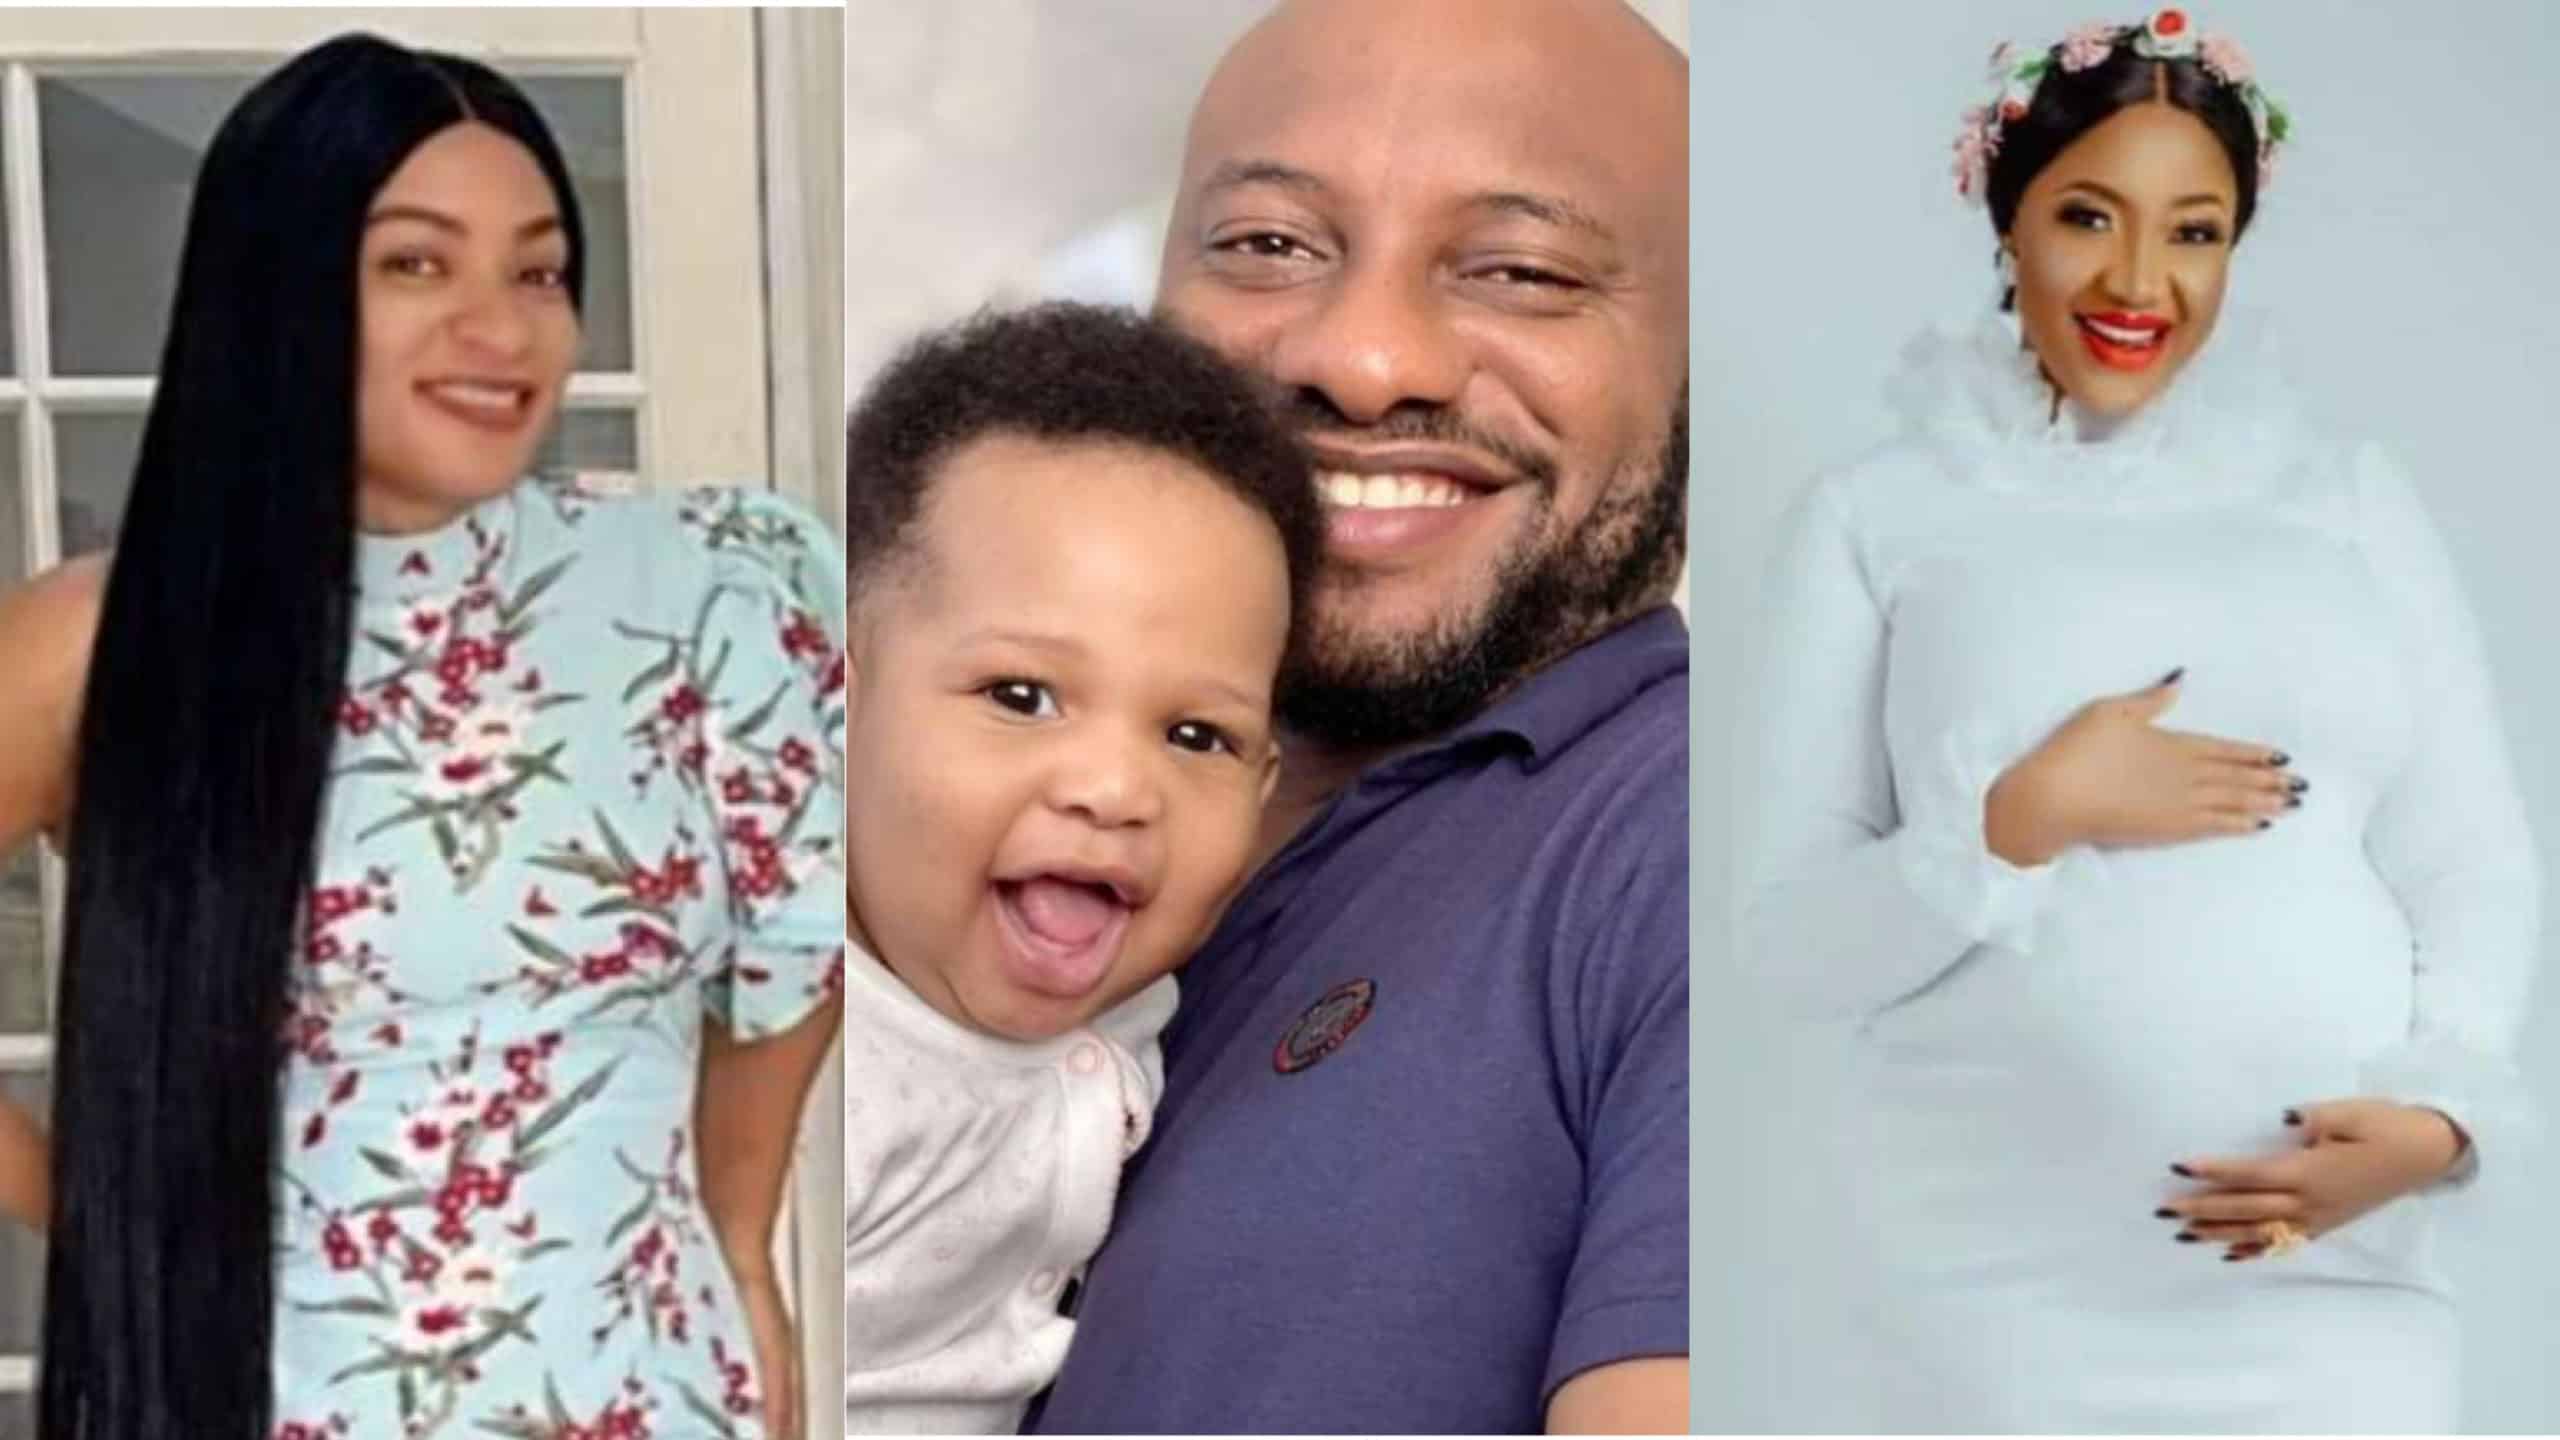 Yul Edochie has son with different woman; wife cries and curses